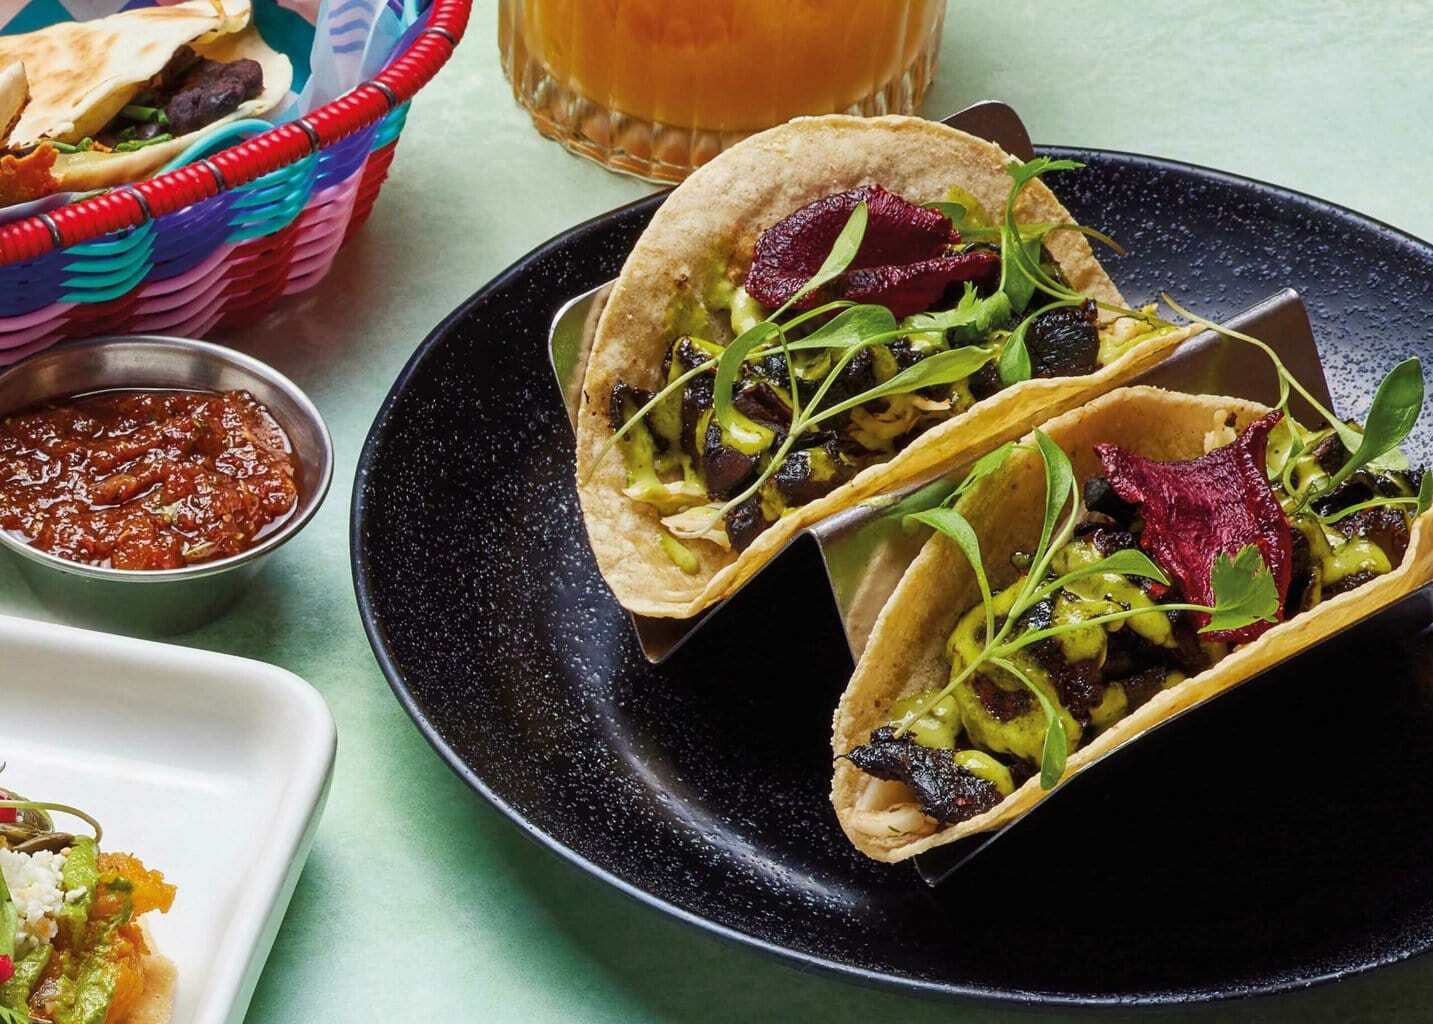 Mushroom tacos topped with beetroot crisps and fresh herbs